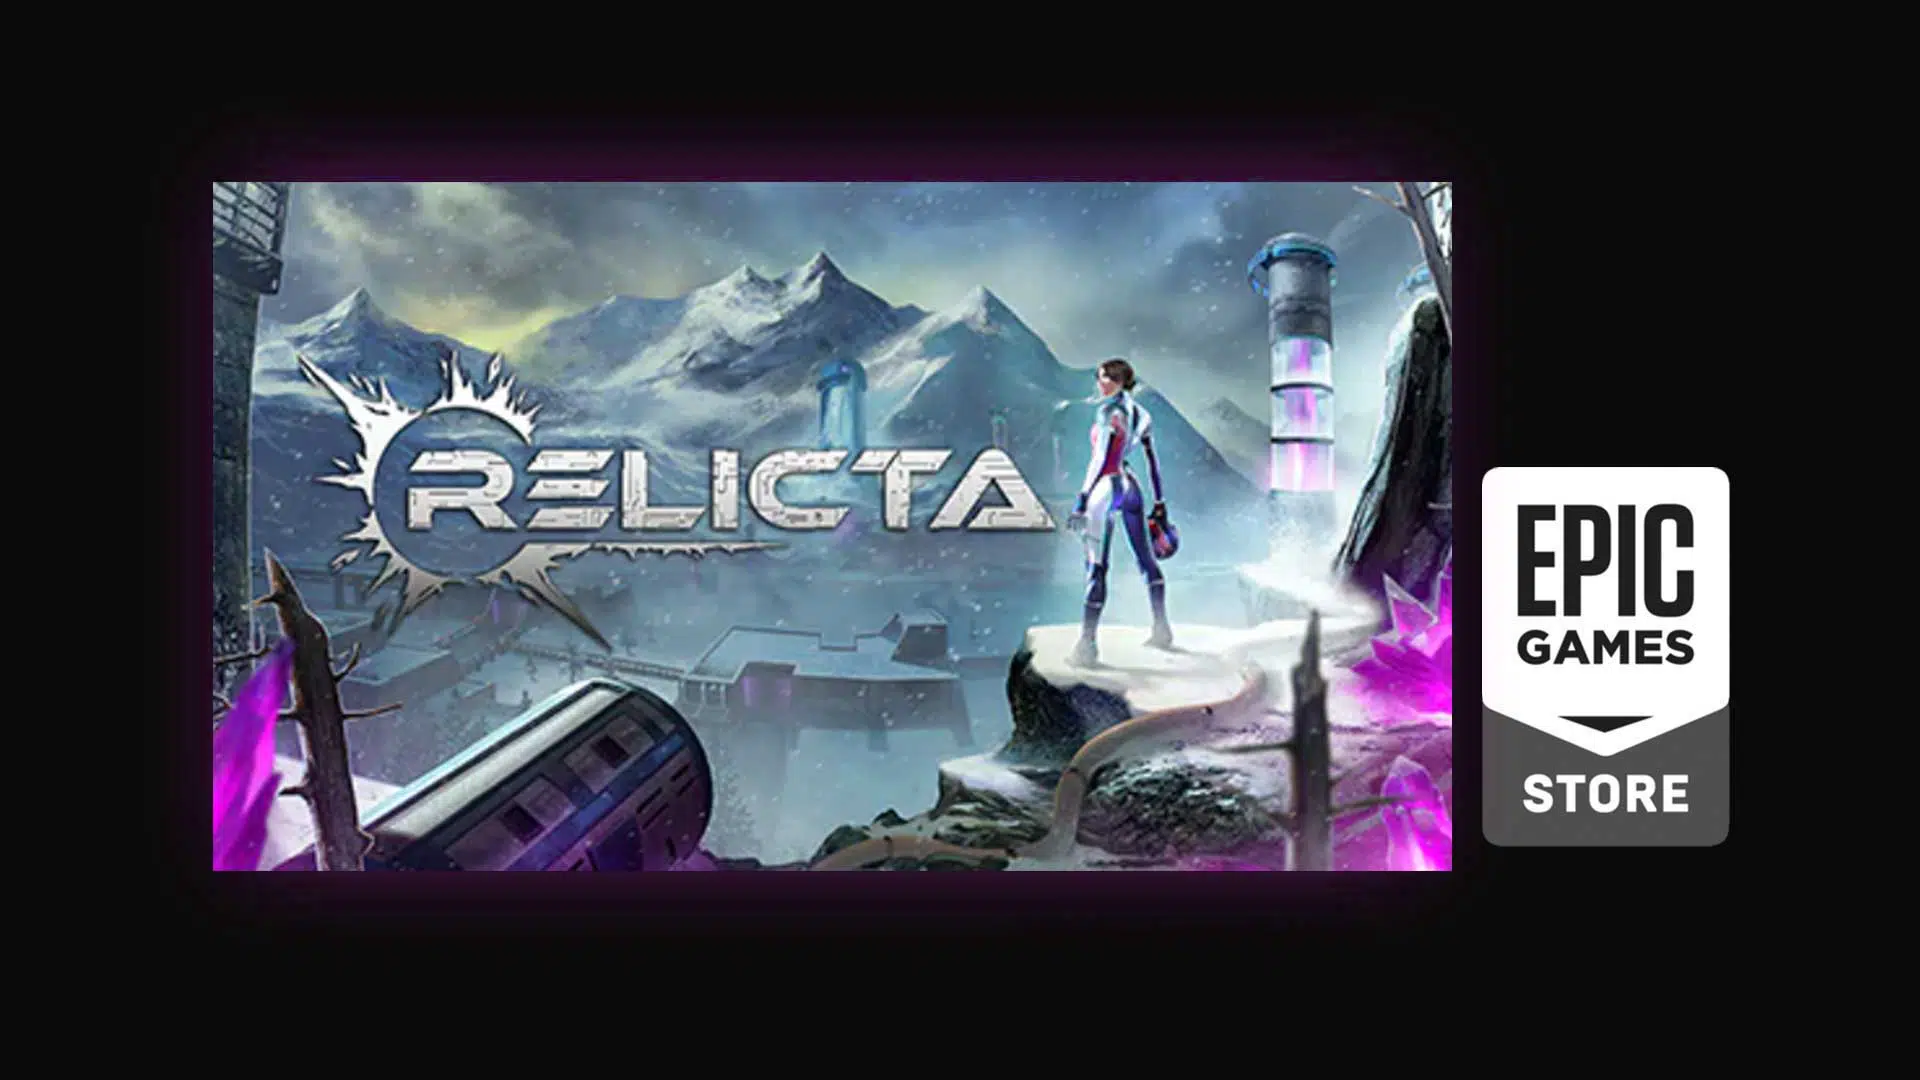 epic games free game 2022 relicta